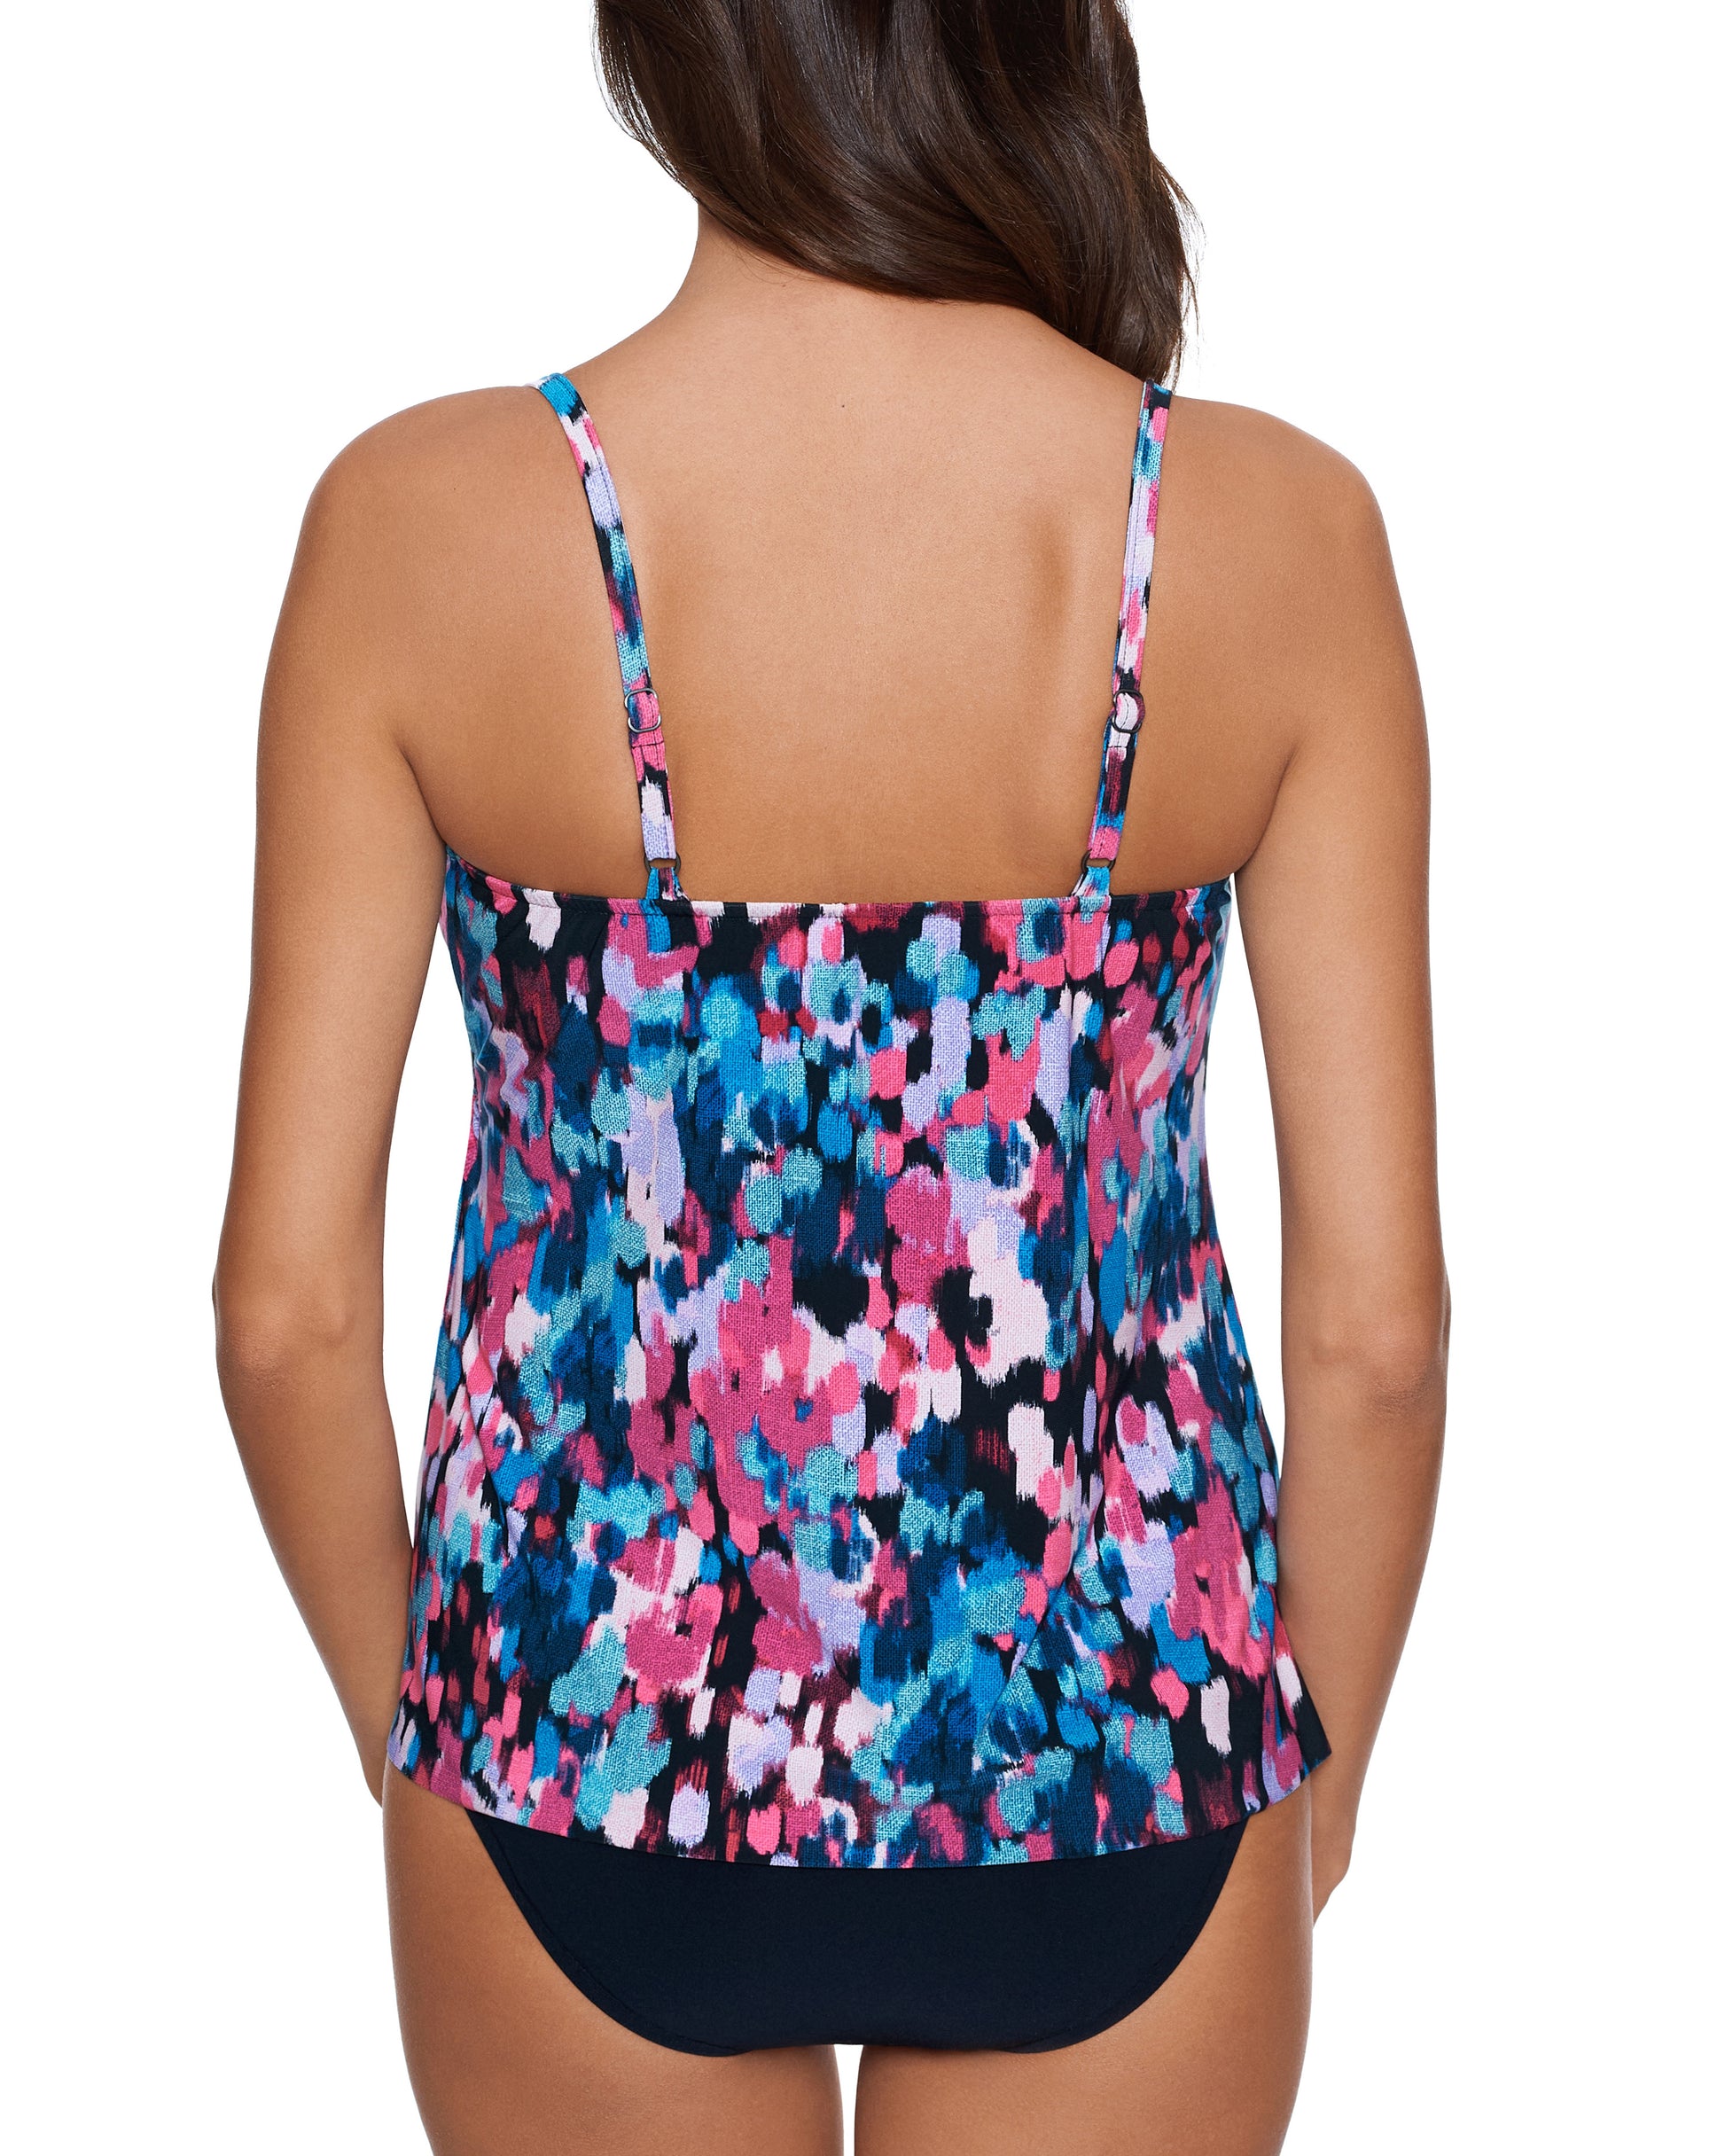 Model wearing a tankini top in a pink, blue, white and black abstract floral print